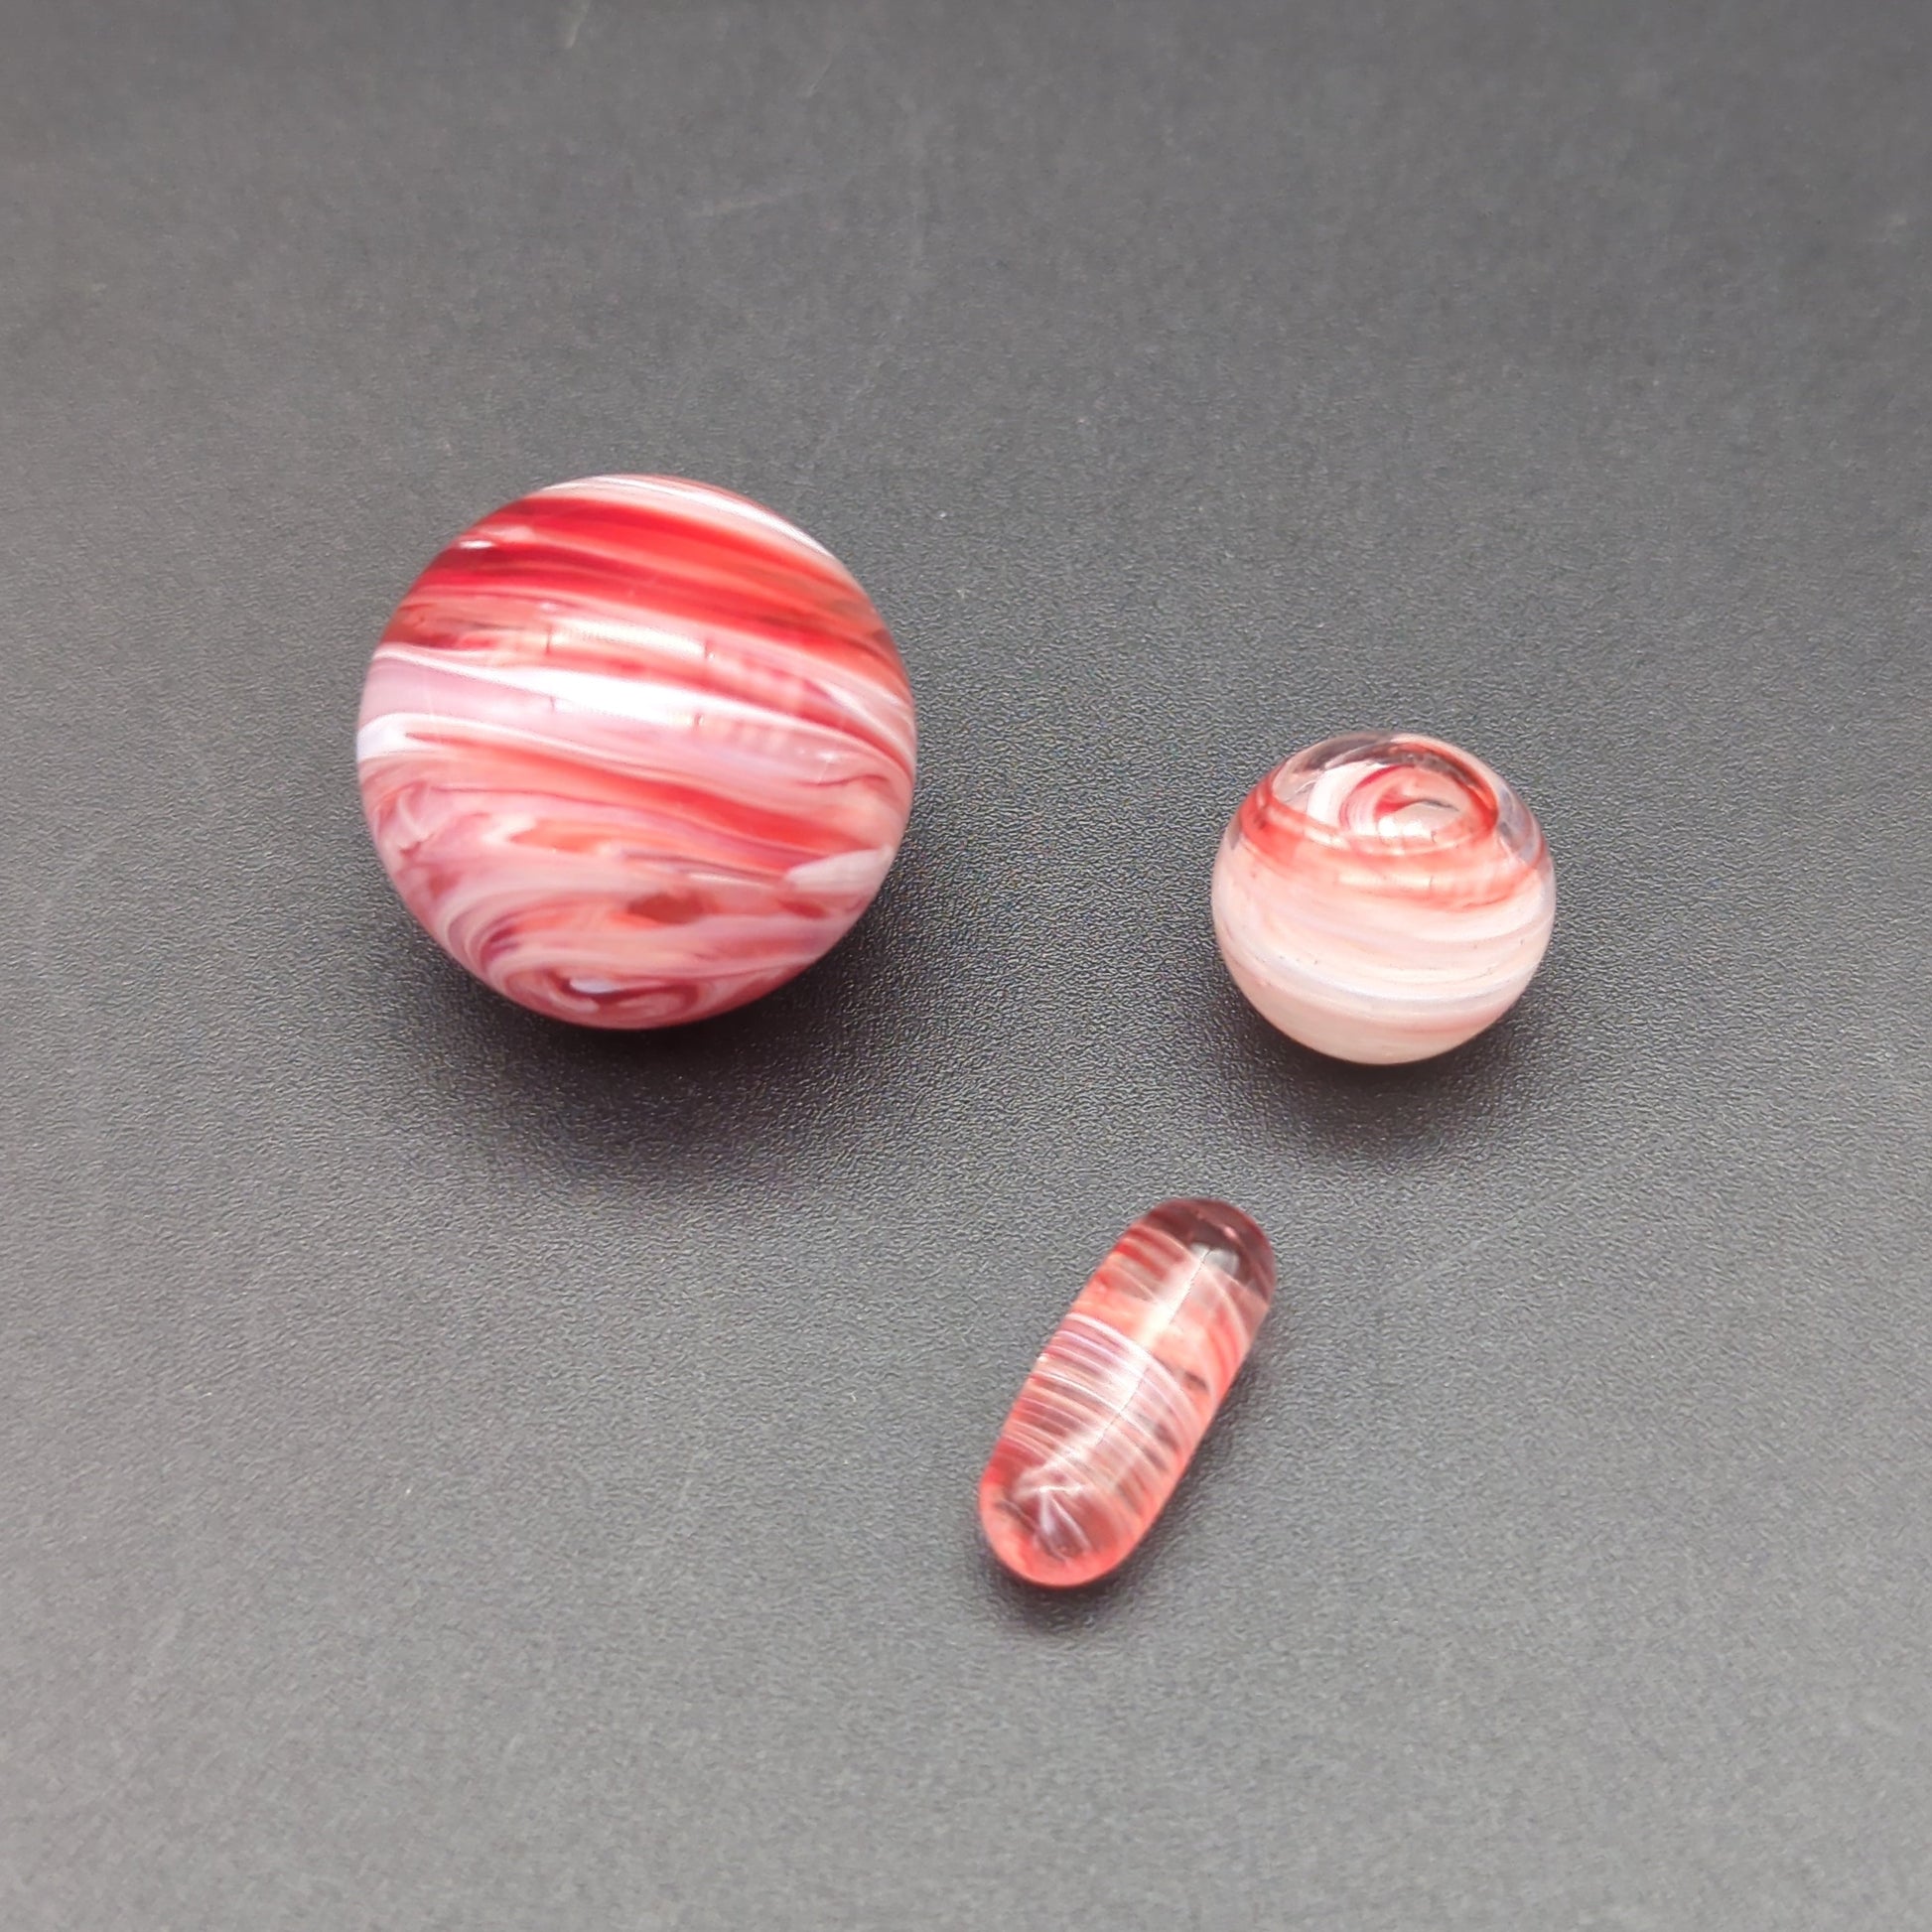 Color Swirl Marble + Pill Set for Terp Slurpers Red